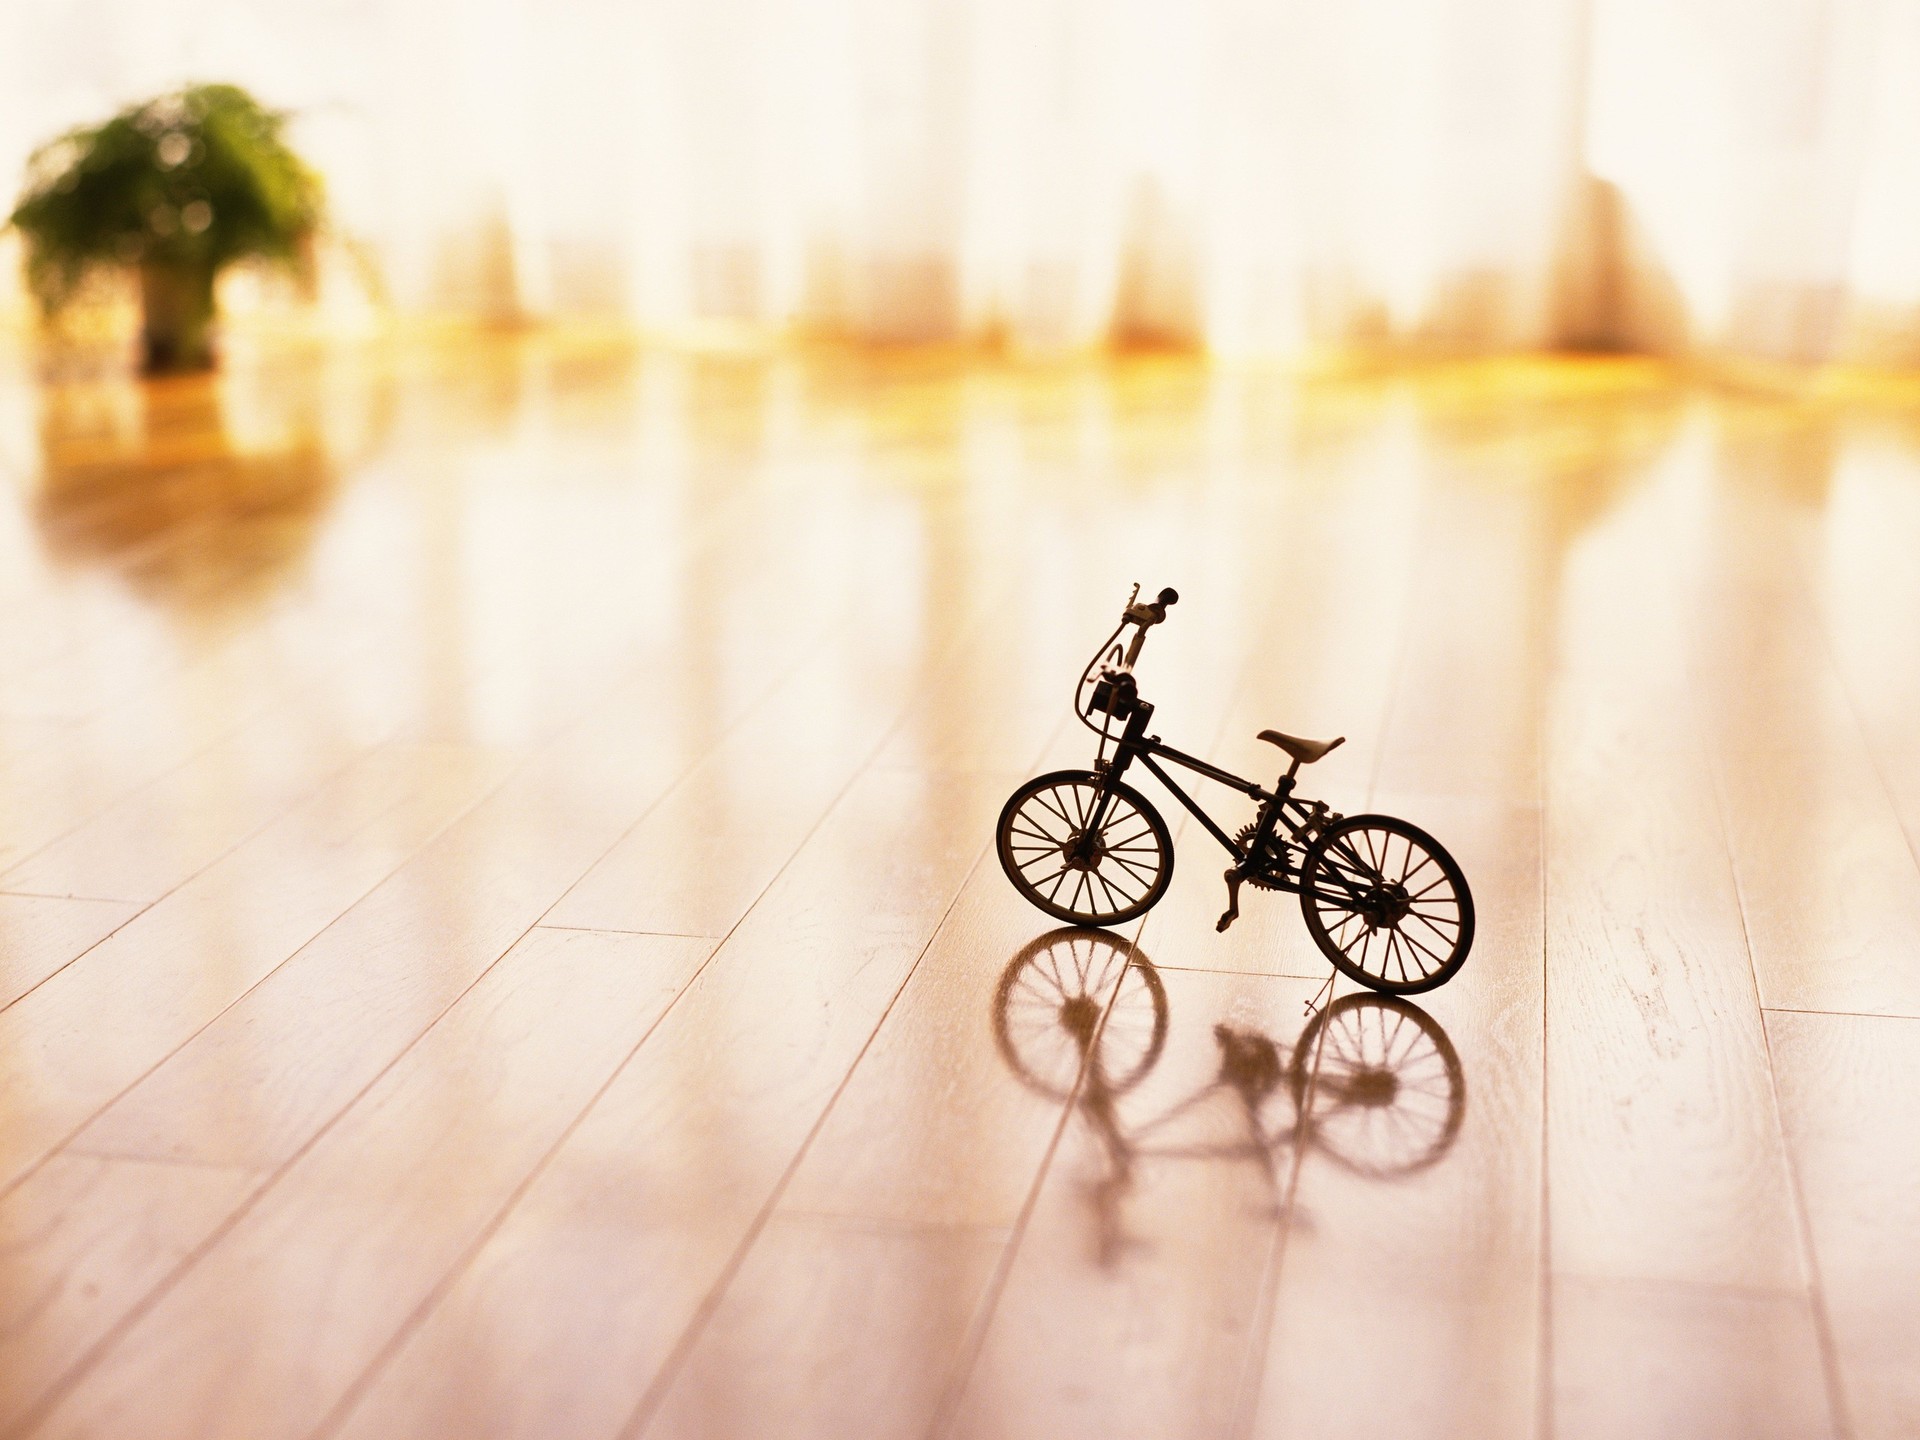 Toy Bicycle Wallpaper 46132 1920x1440px